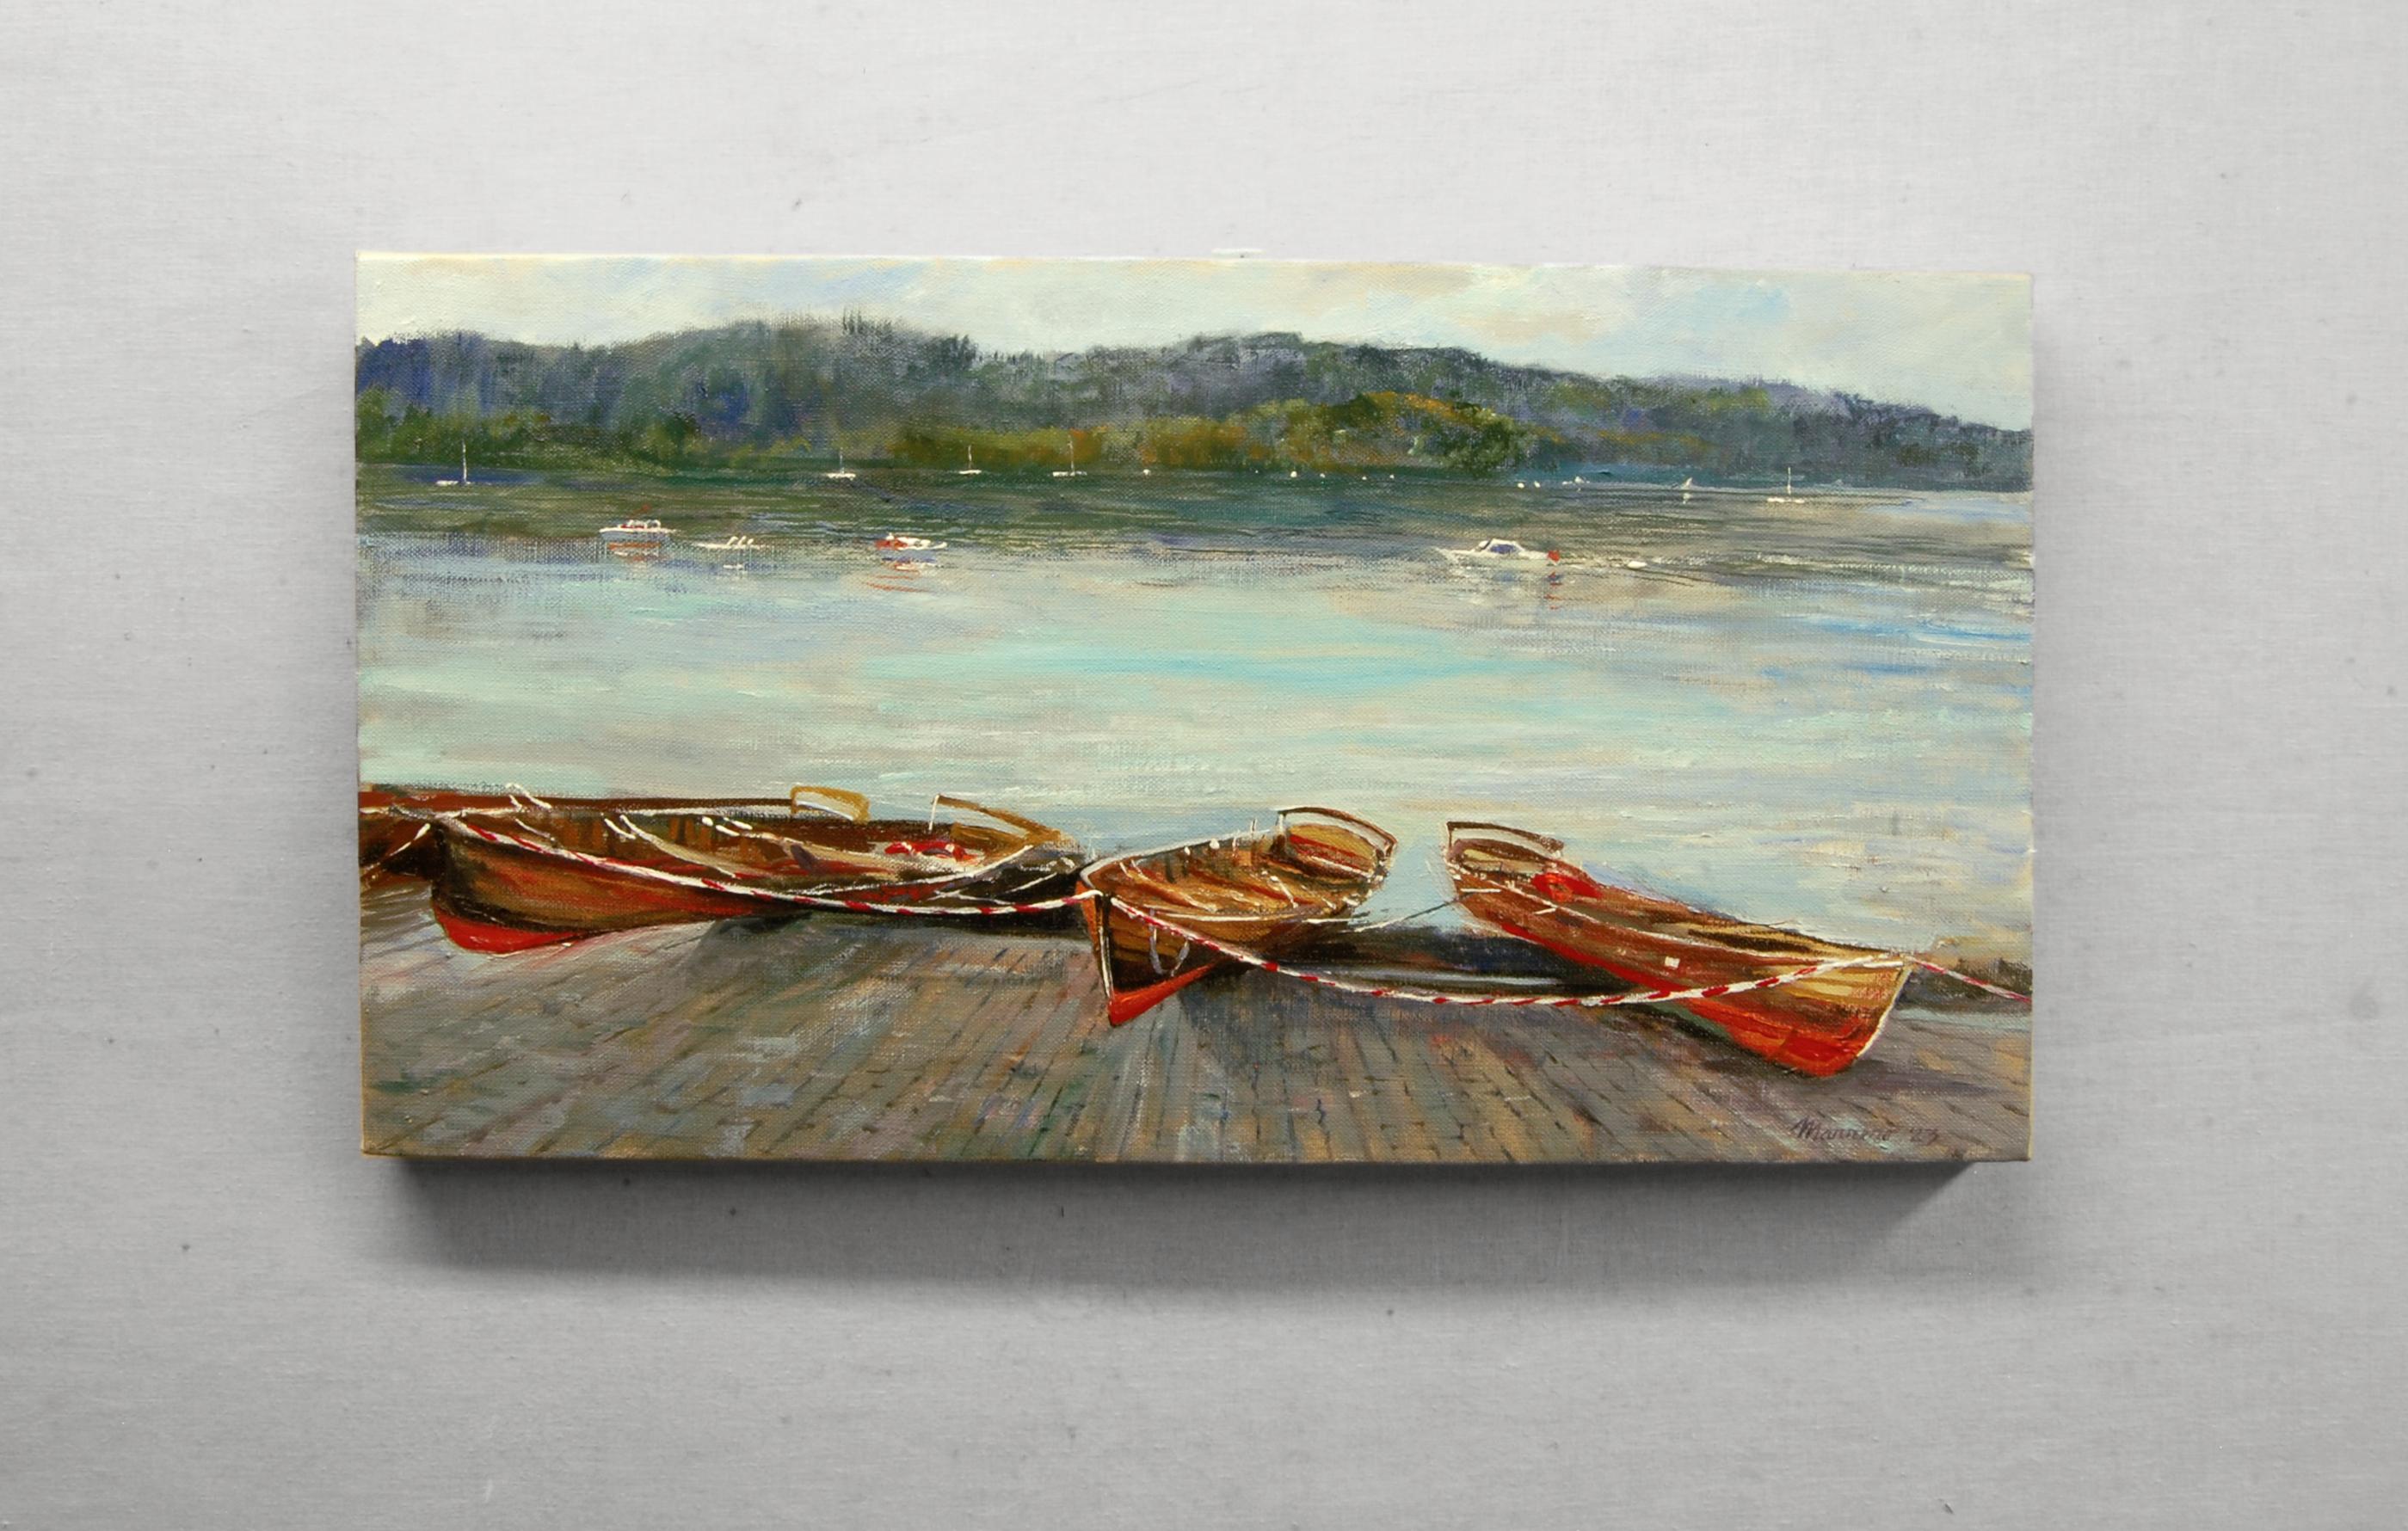 <p>Artist Comments<br>Three skiffs rest at the southern part of Lake Windermere in England while ferry boats cruise in the distance. The peaceful water reflects the cloudy sky above. The scene gains depth from the contrast between the colors and